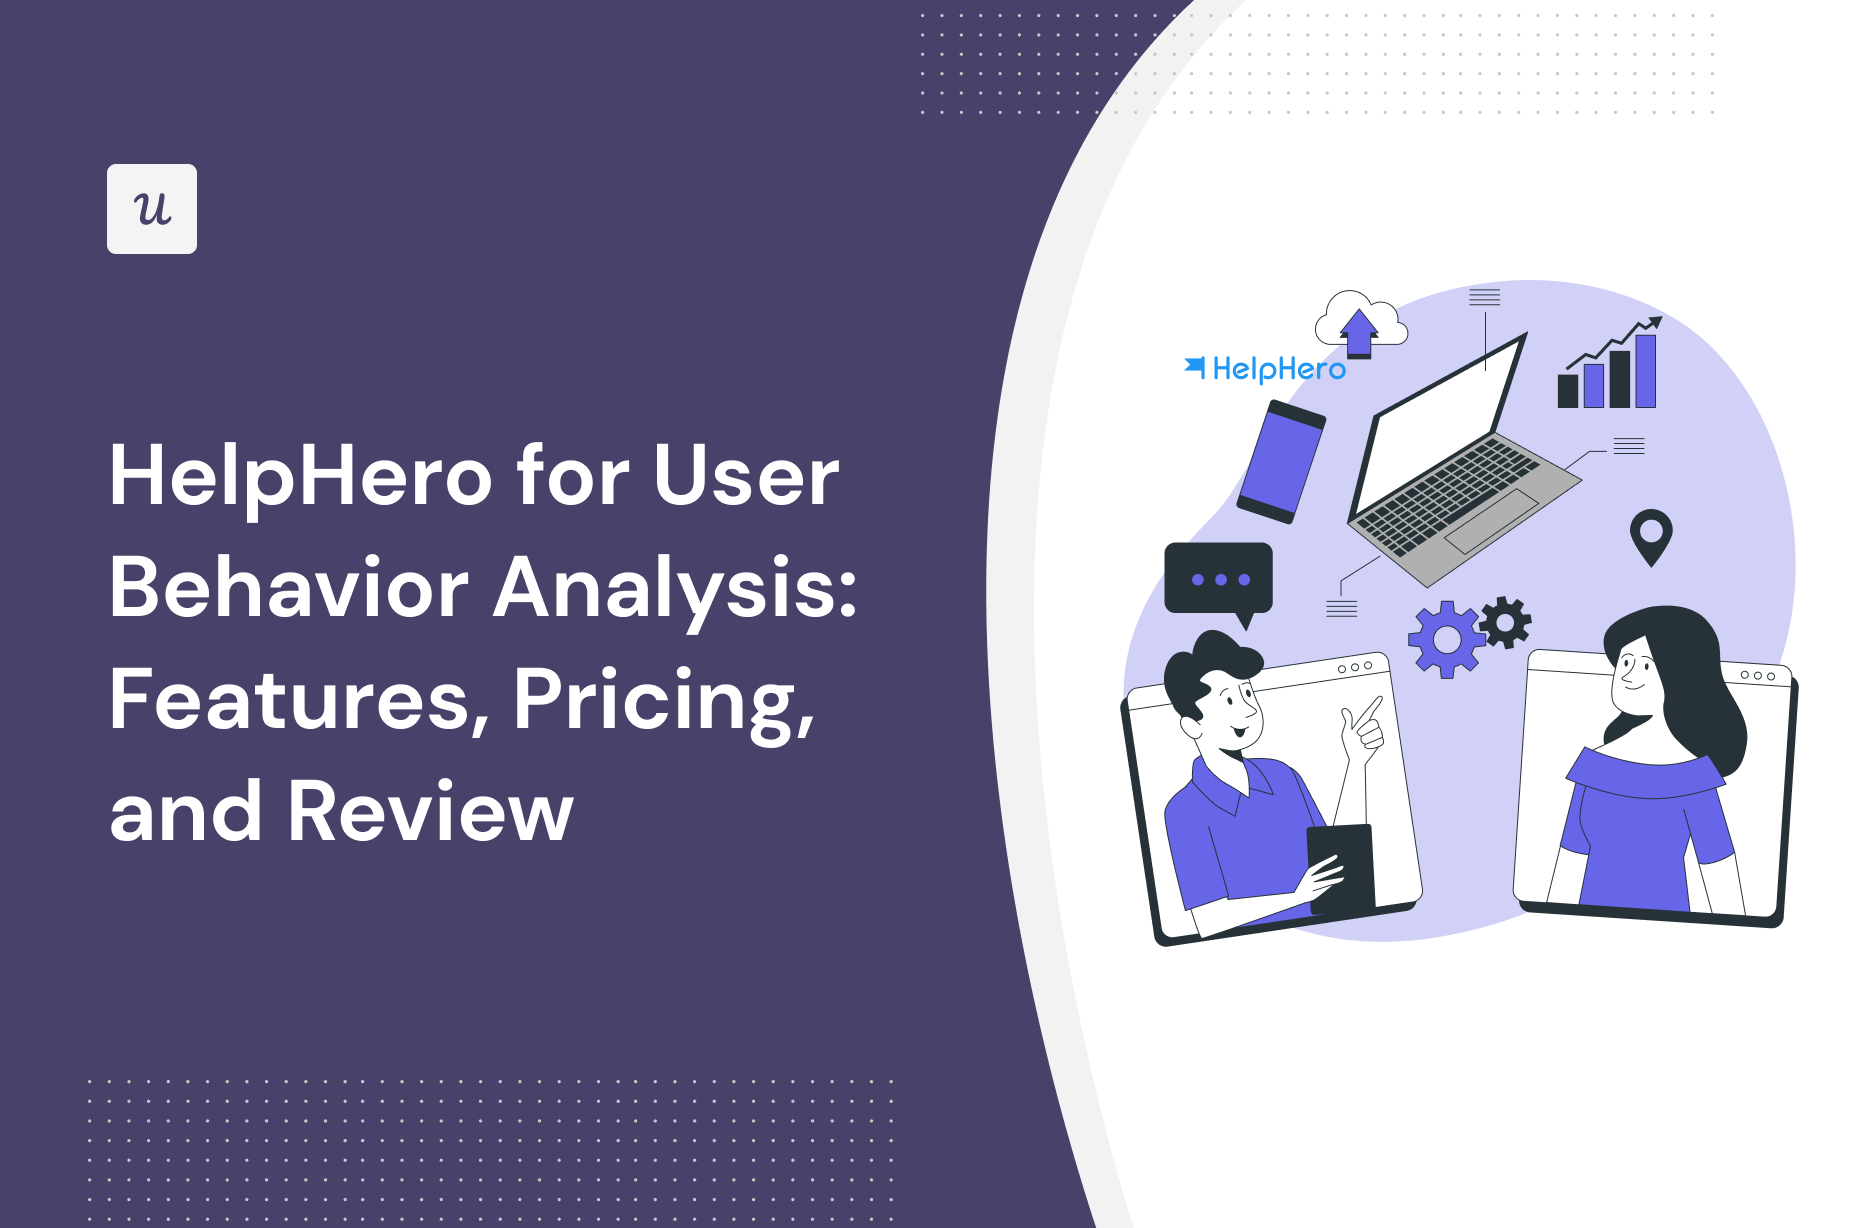 HelpHero for User Behavior Analysis: Features, Pricing, and Review